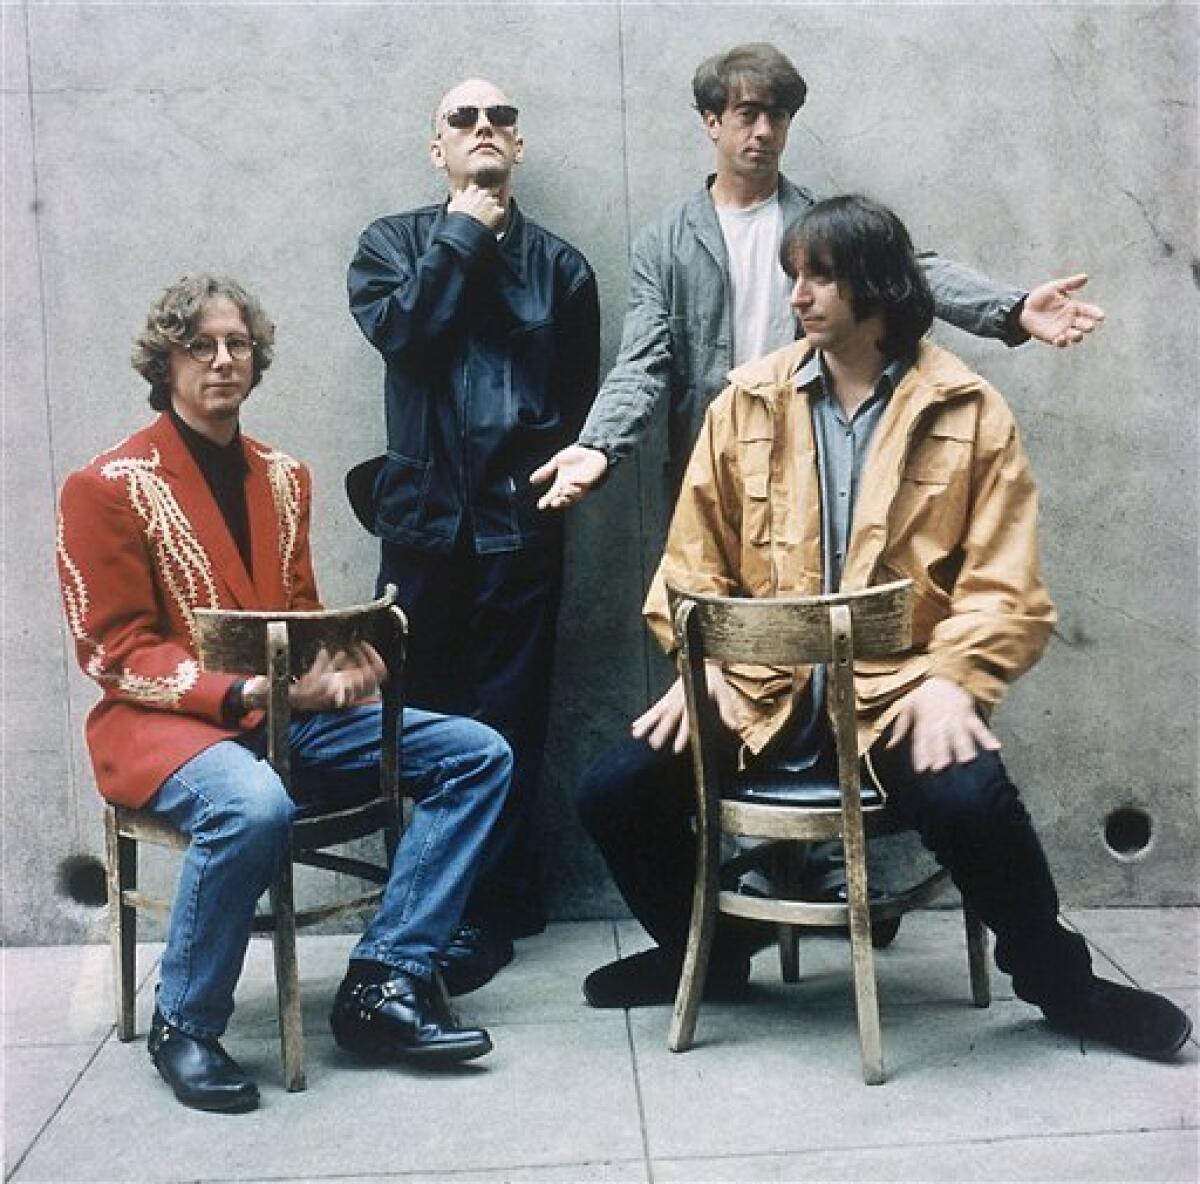 R.E.M., America's best rock band, breaks up after 31 years – East